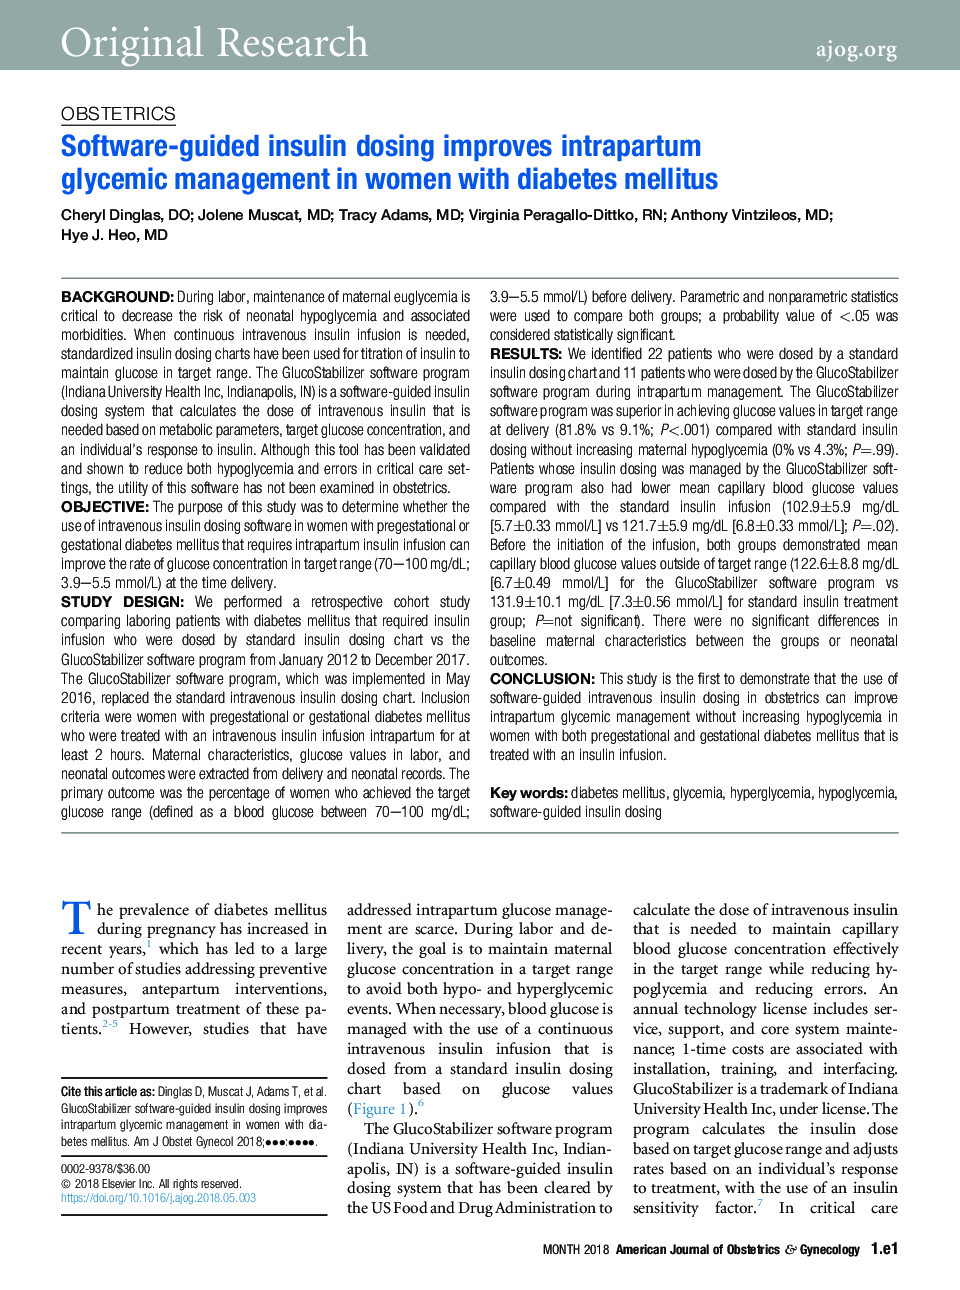 Software-guided insulin dosing improves intrapartum glycemic management in women with diabetes mellitus